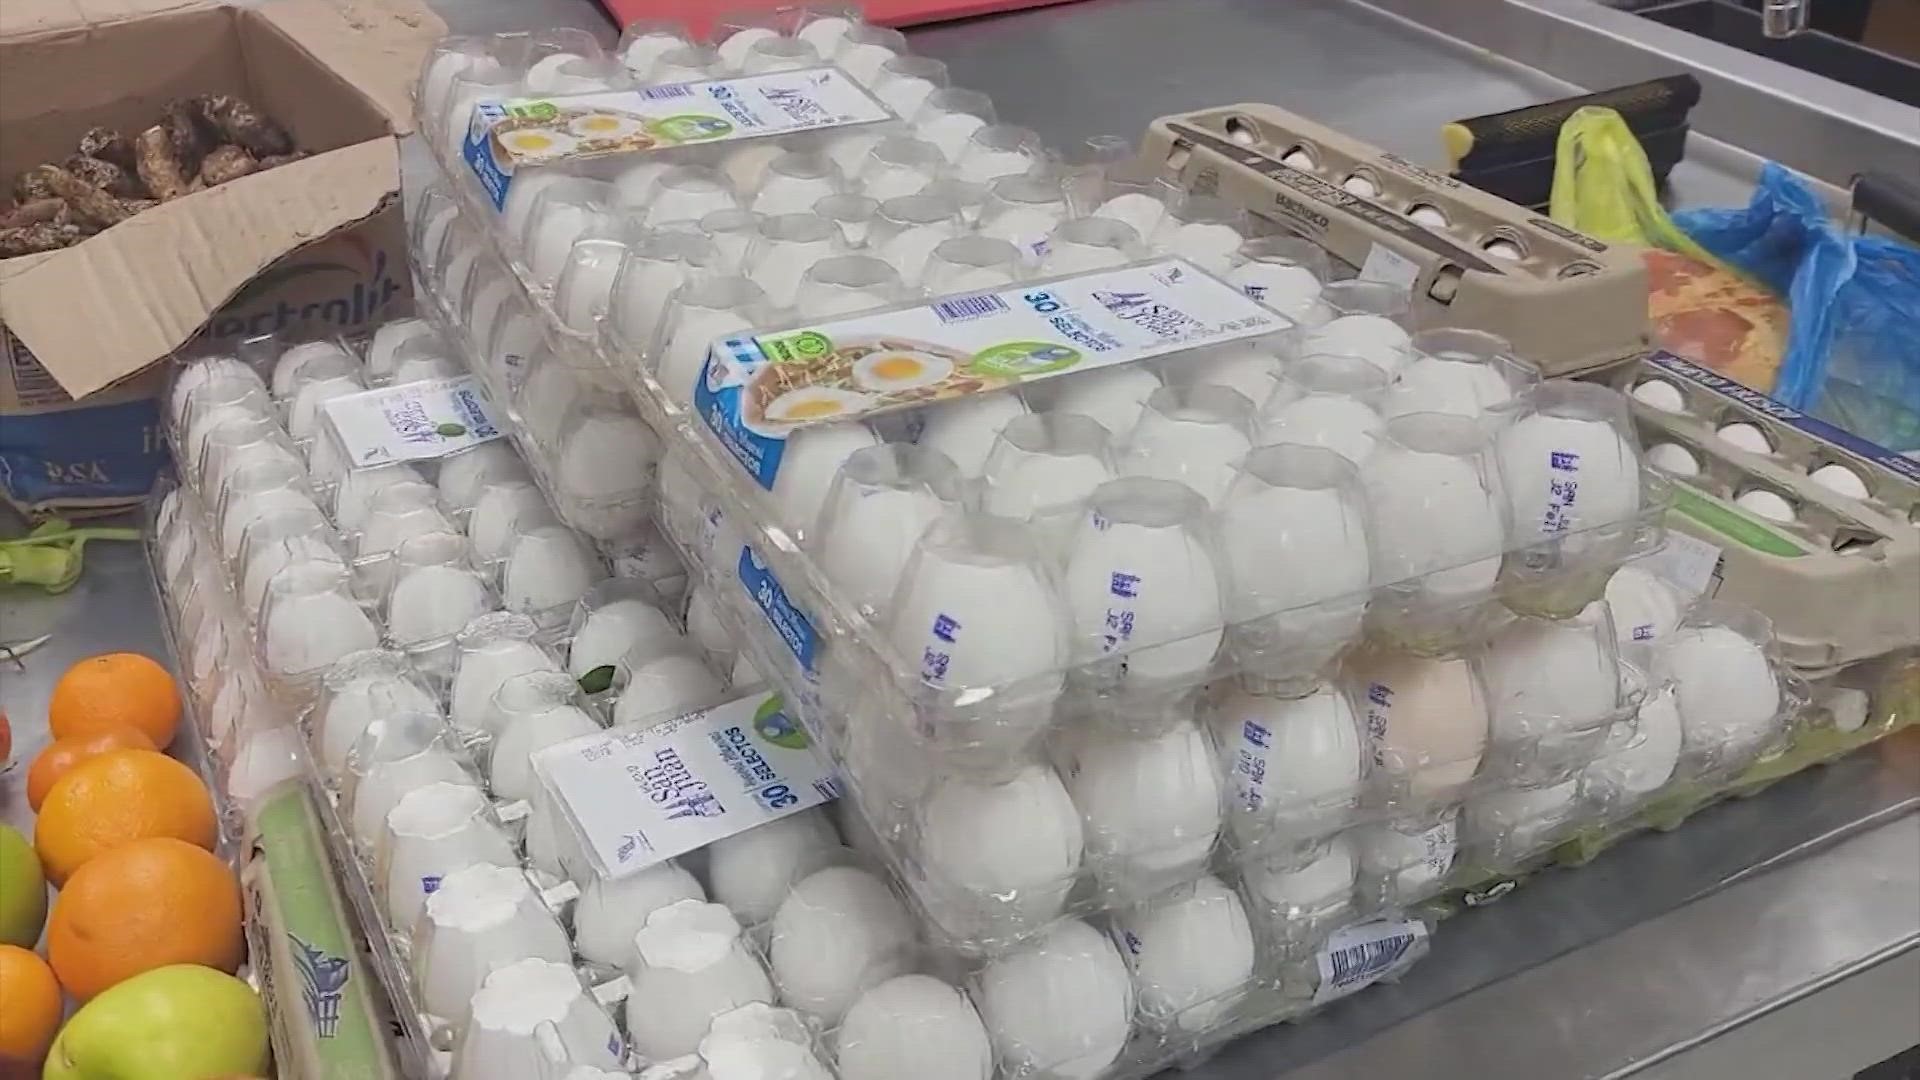 Border Patrol agents said they have experienced about a 300% increase in the interception of raw eggs at the South Texas ports of entry.